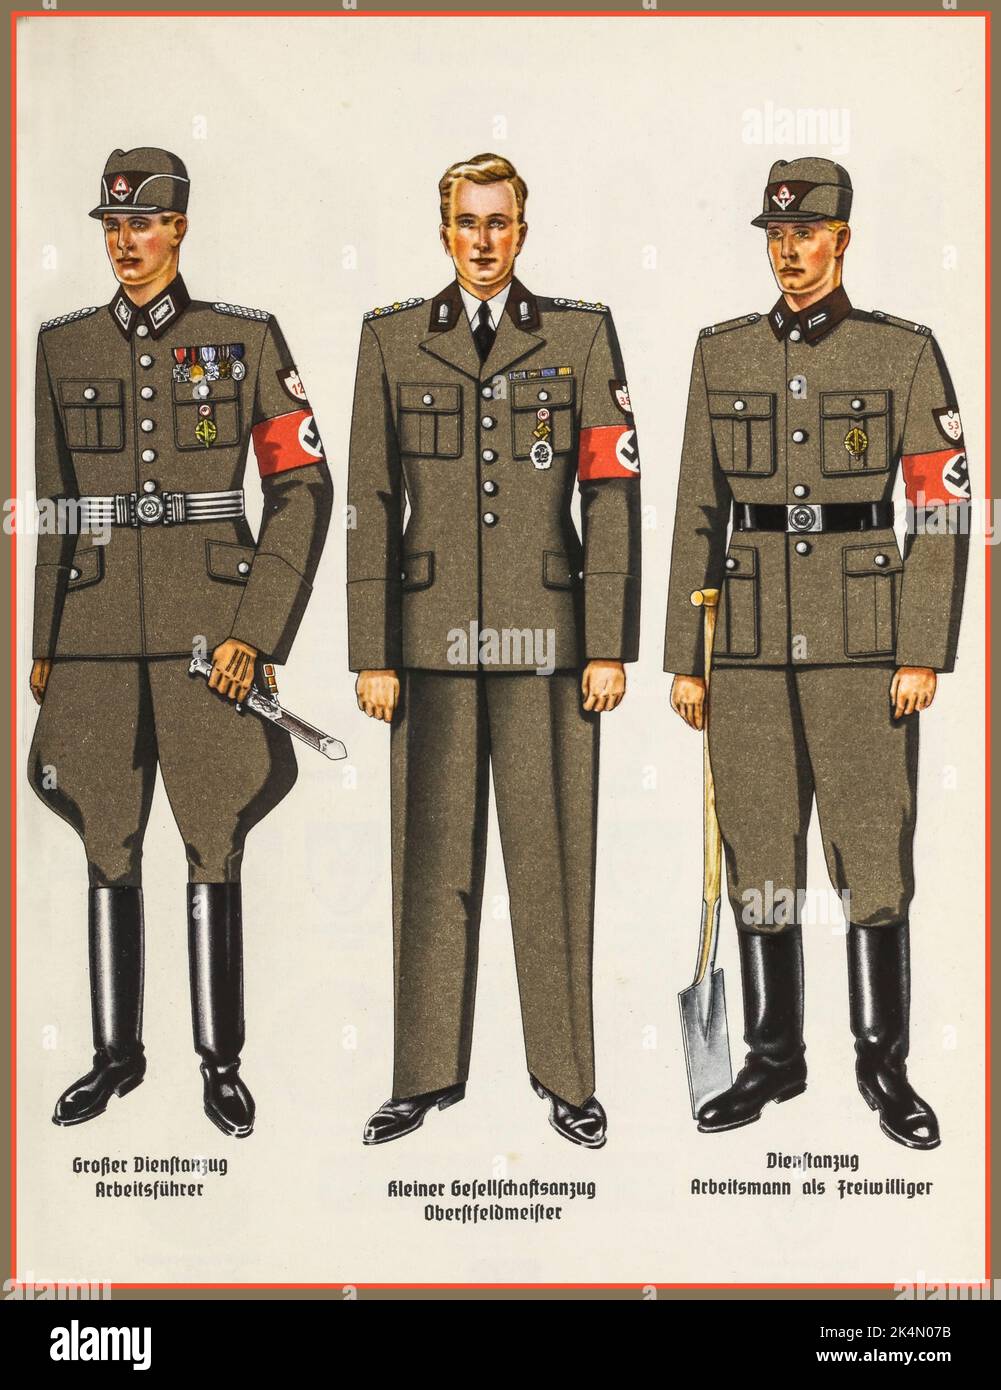 RAD Nazi uniforms of the Reich Labour Service (Reichsarbeitsdienst; RAD), a major organisation established in Nazi Germany as a labour agency to help mitigate the effects of unemployment on the German economy, militarise the workforce and indoctrinate it with Nazi ideology. The official state labour service was divided into separate sections for men and women. From 1935 onward, men aged between 18 and 25 may have served six months before their military service. Stock Photo